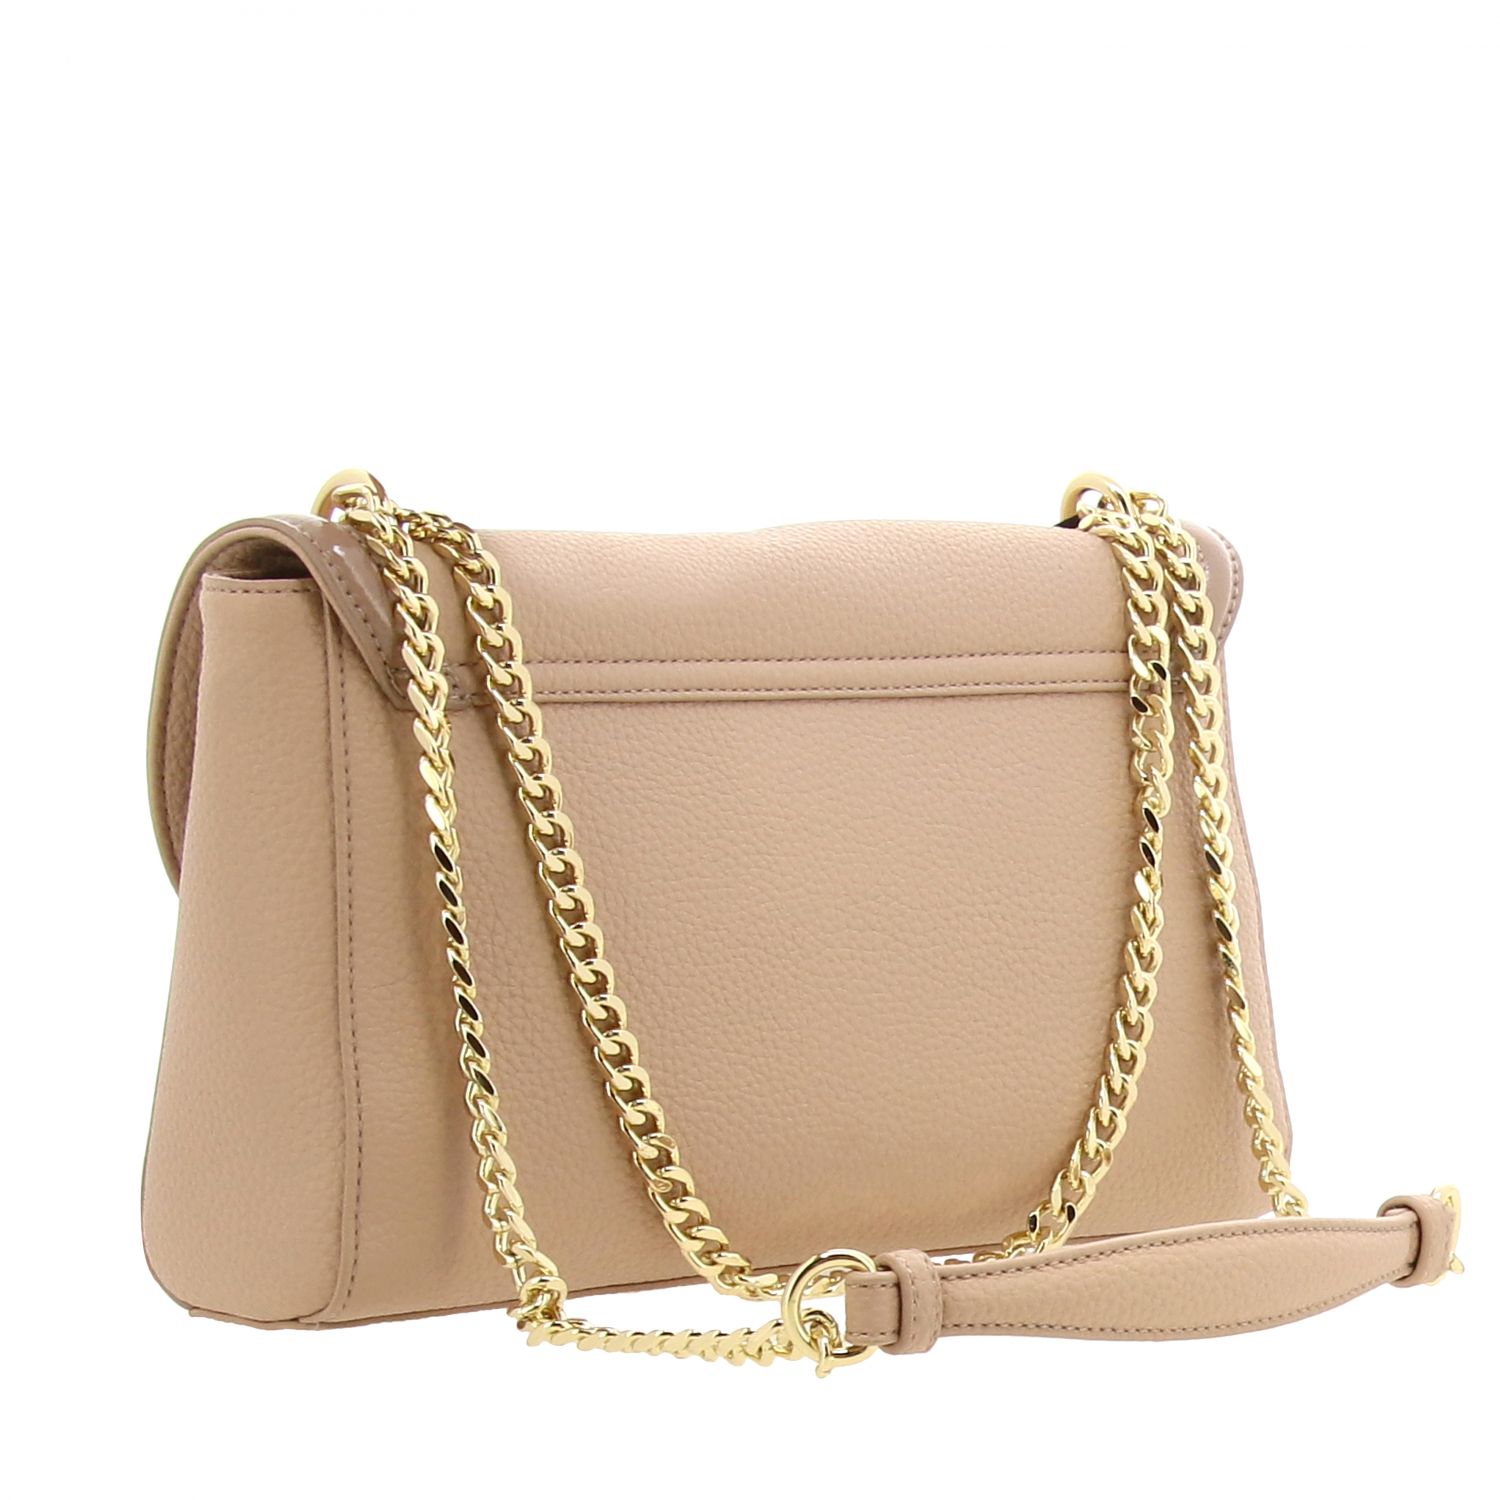 Twinset Outlet: crossbody bags for women - Pink | Twinset crossbody ...